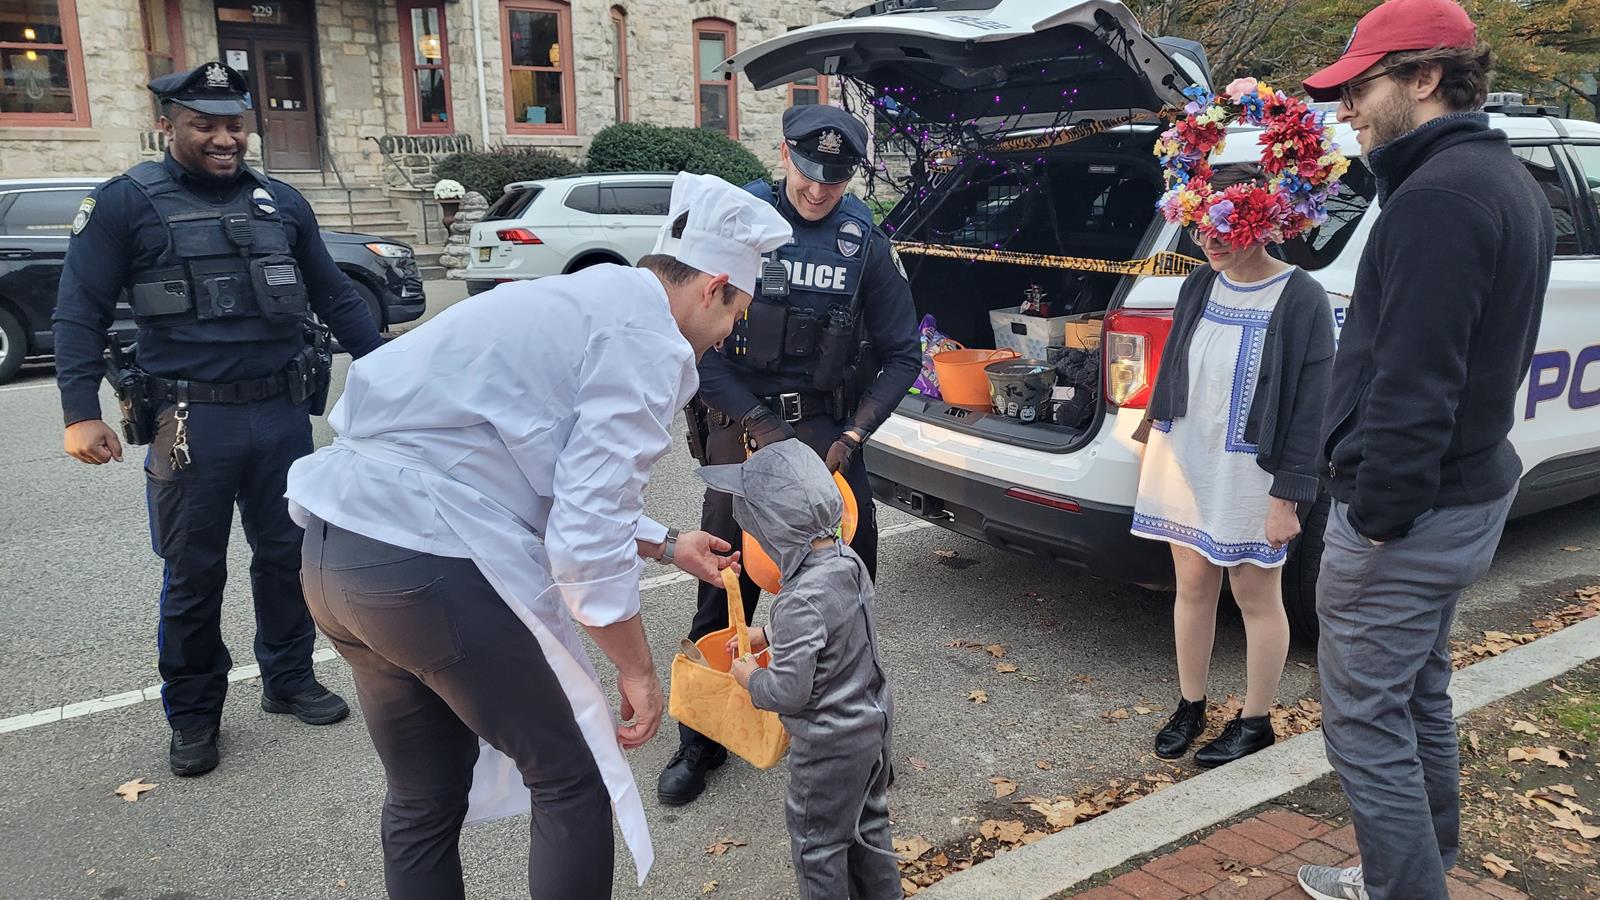 Public Safety officer watches as a child is trick or treating on the streets.